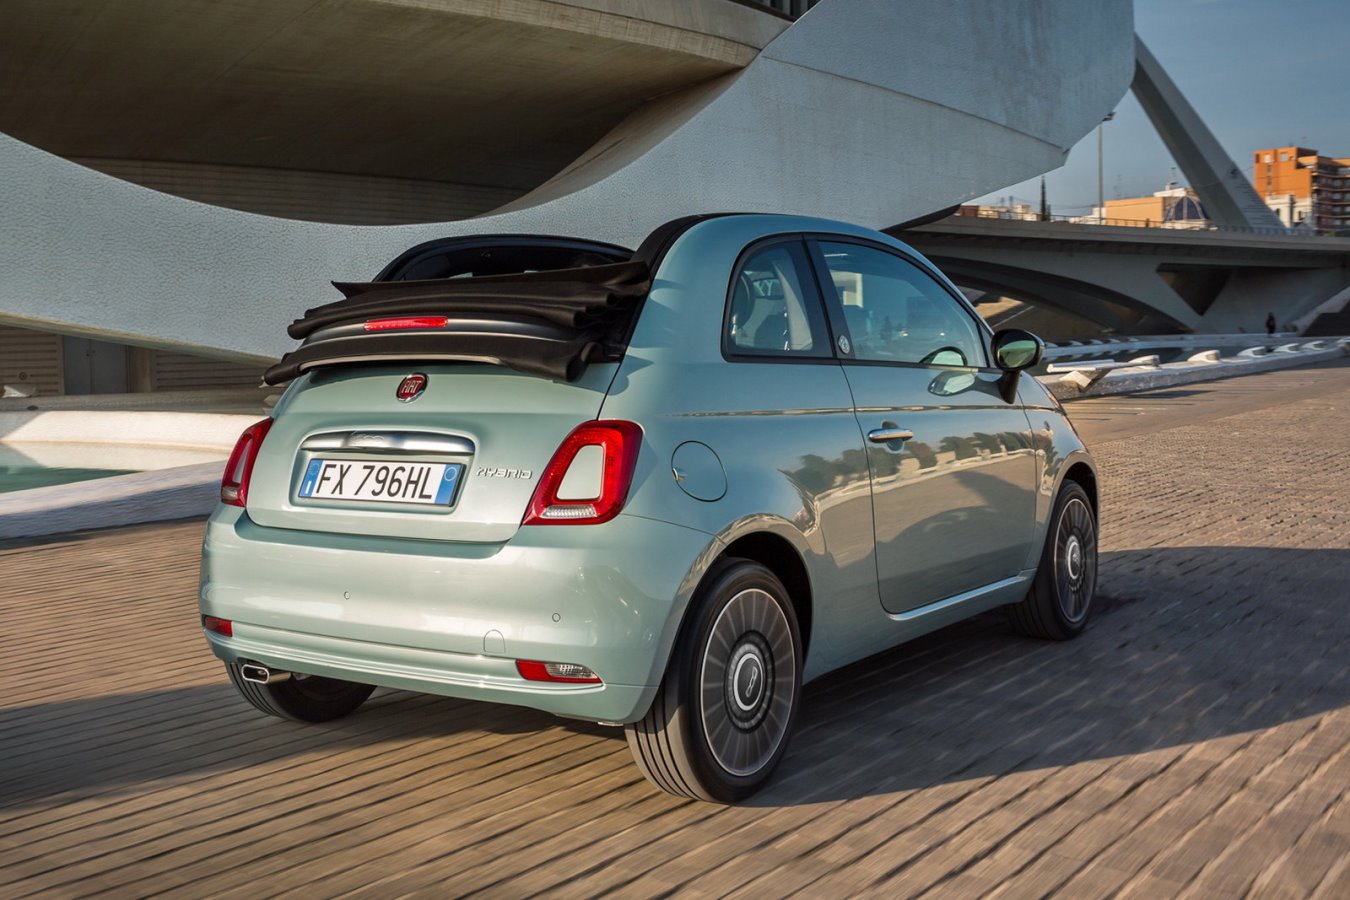 Fiat 500 hybrid arriving in July: the car that will comply with approvals